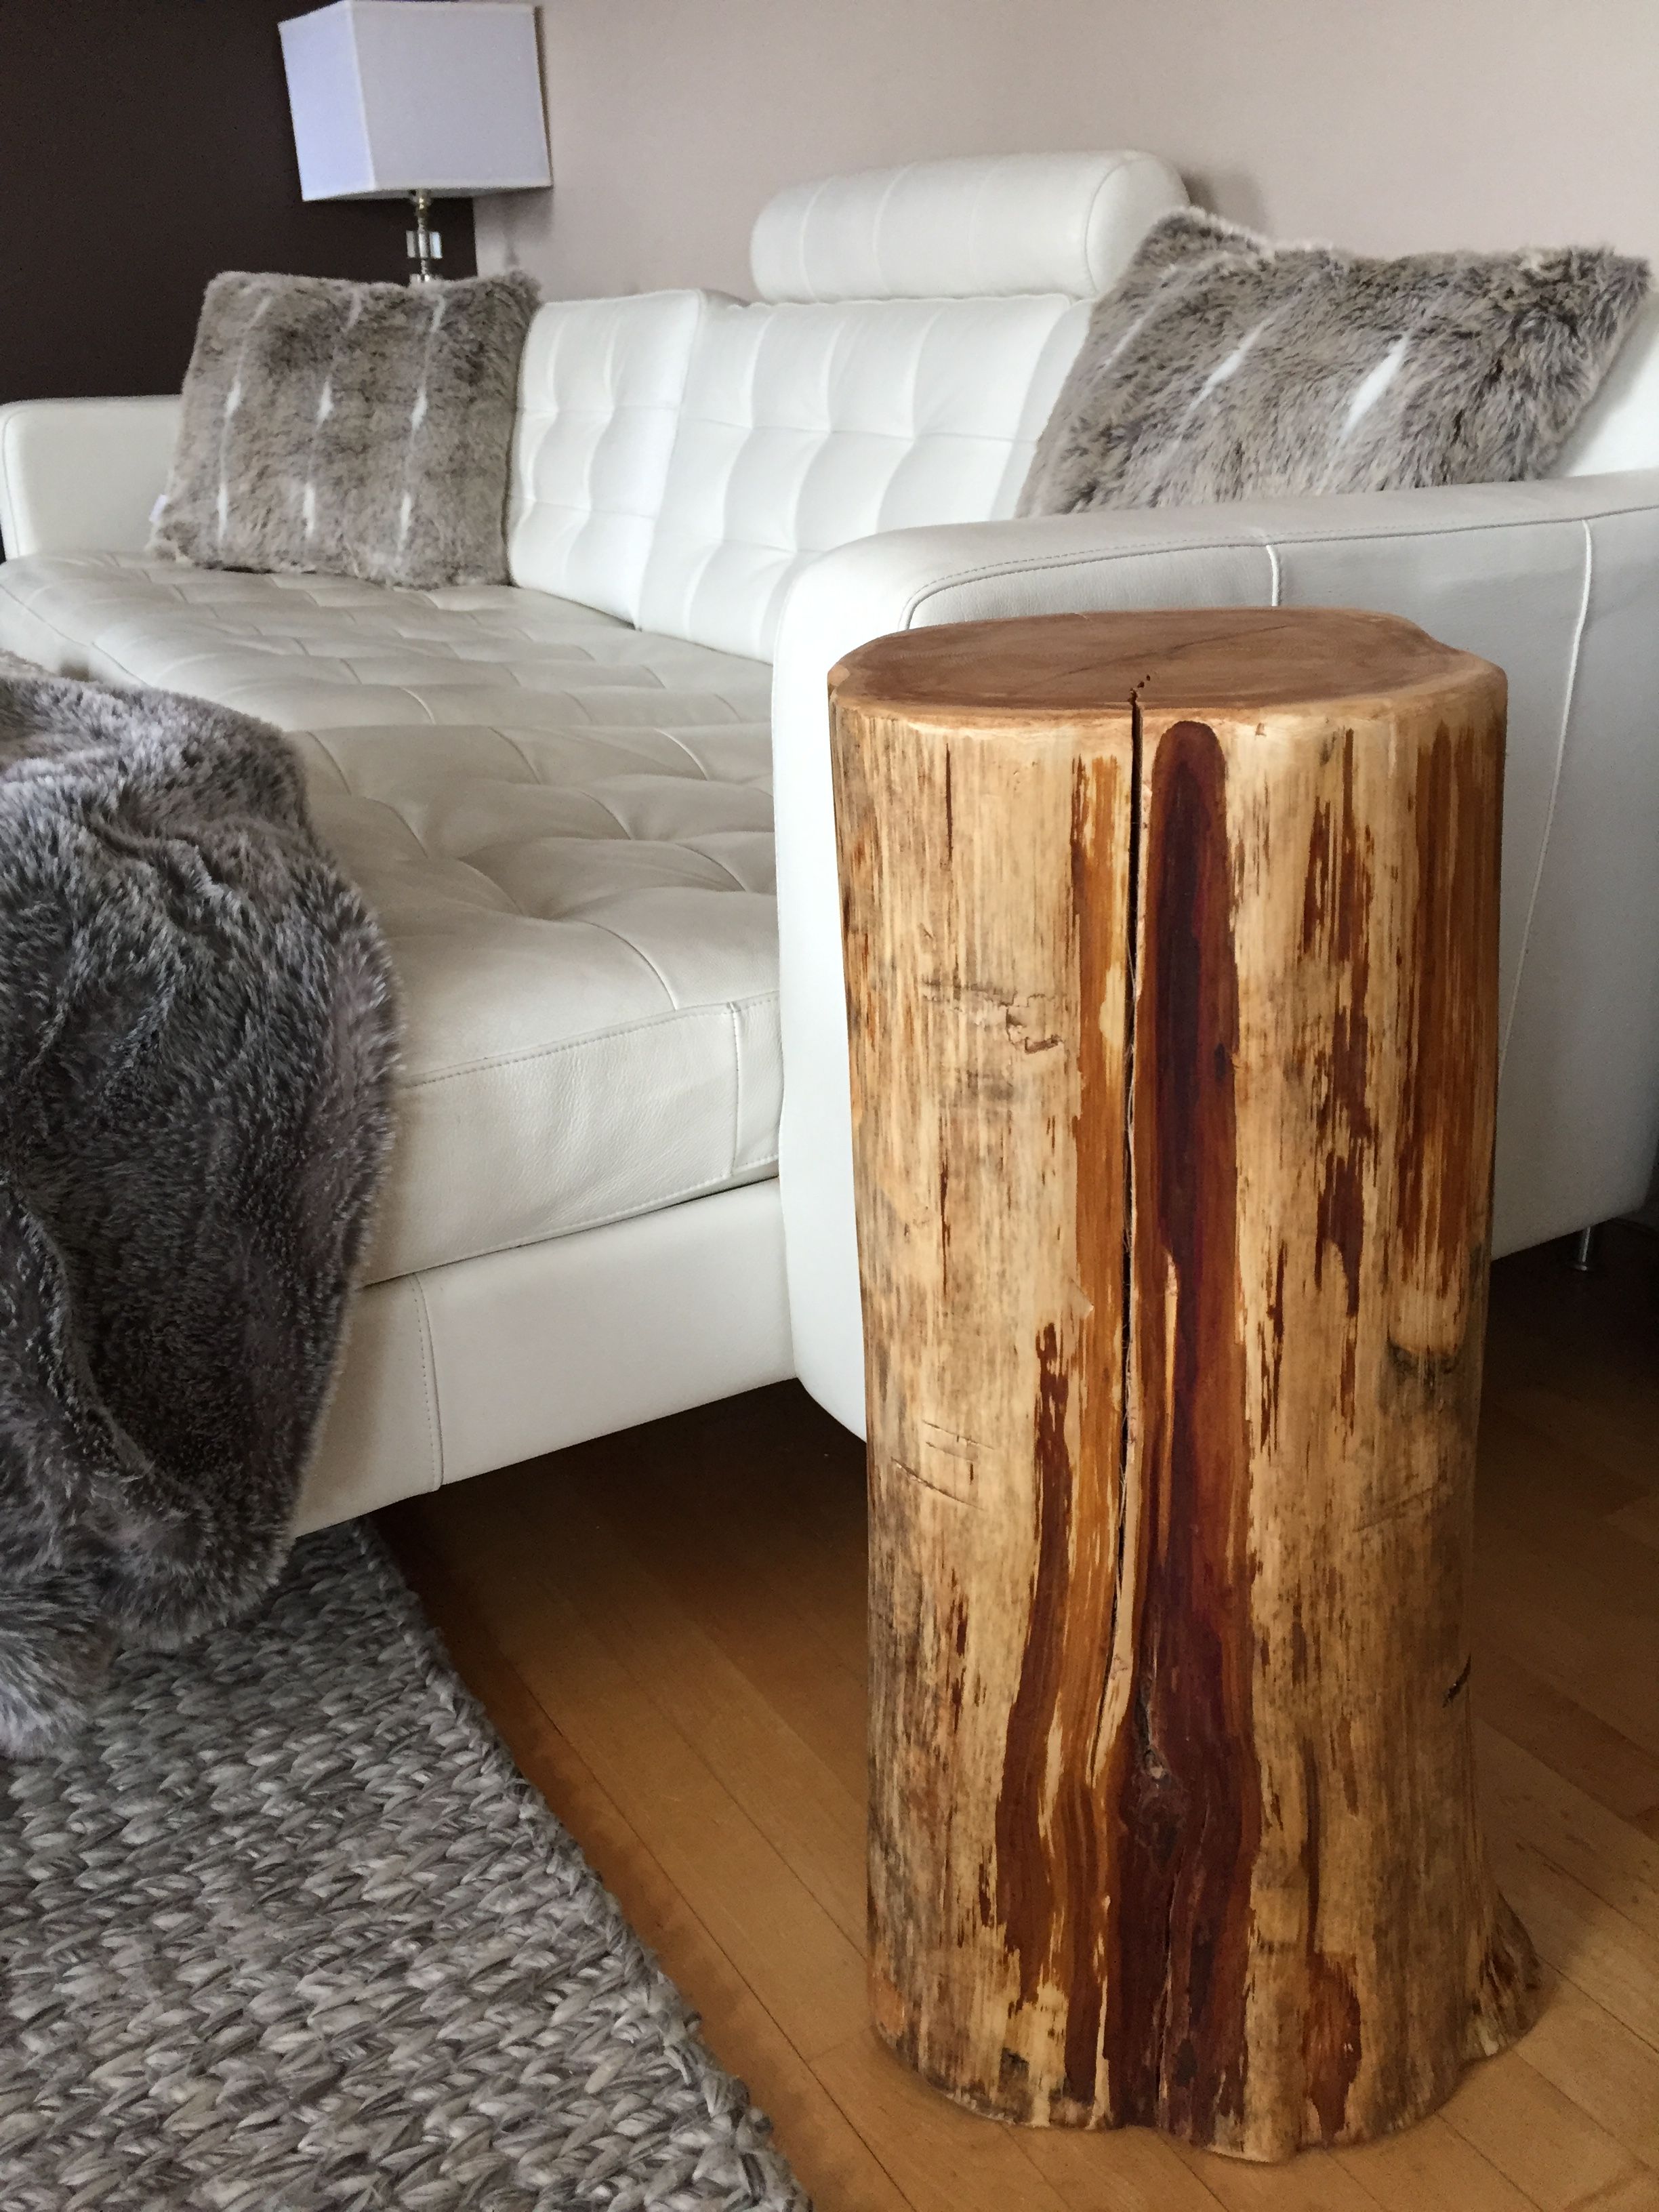 stump end table tall tree trunk for bedside diy pallet dog kennel glass dining base ideas with wicker drawers bluestone parsons coffee paint colors dark wood furniture making high